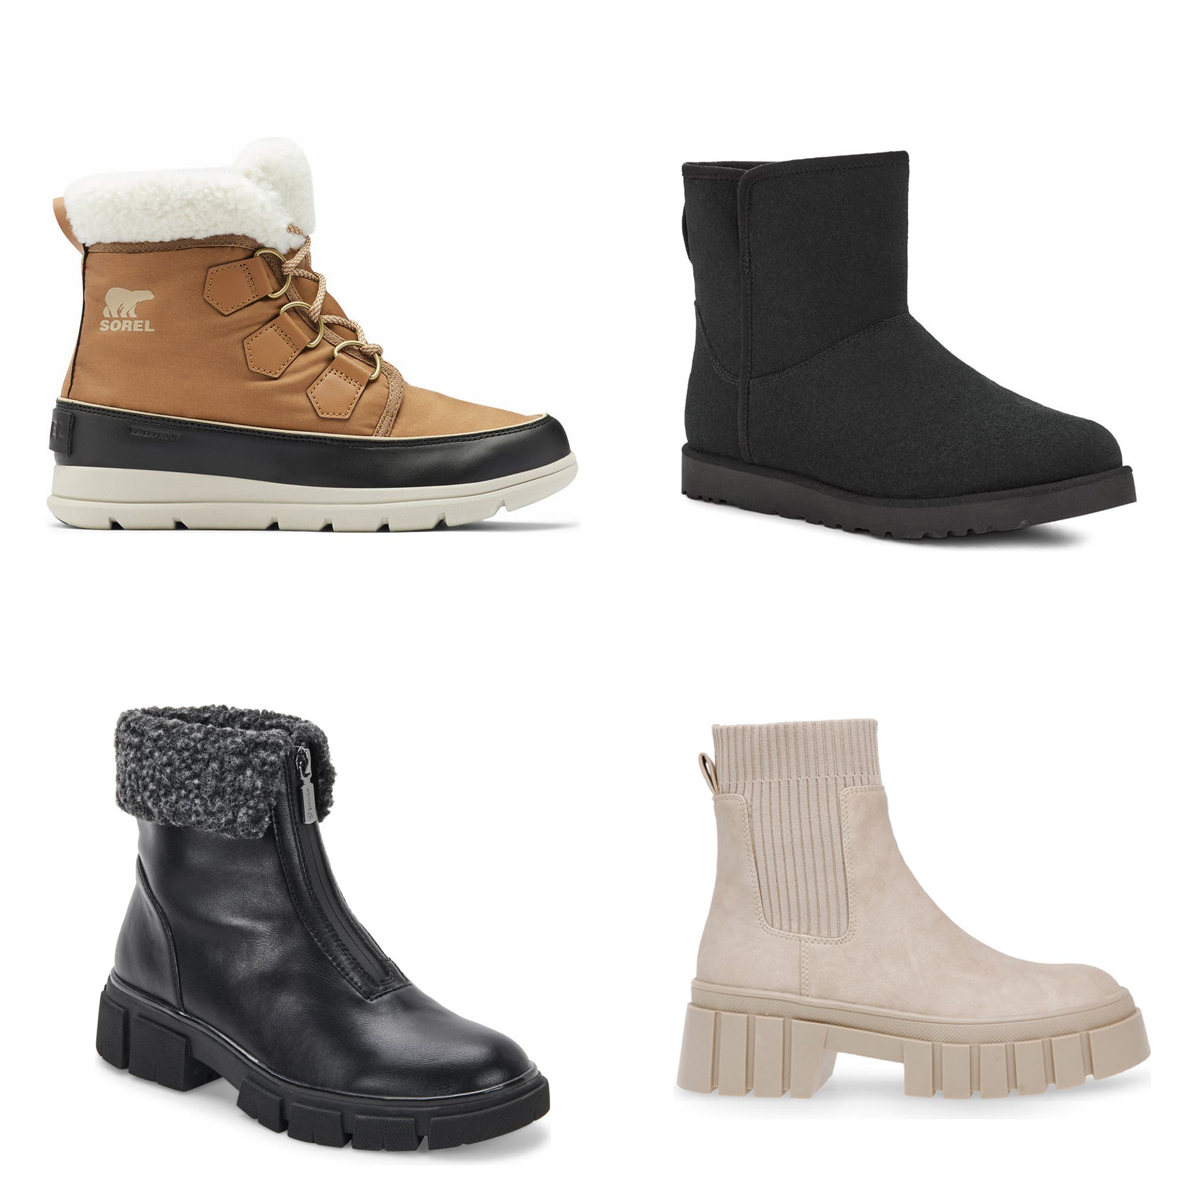 Shop These Nordstrom Rack Cold Weather Boot Deals With Starting at $21 - E!  Online